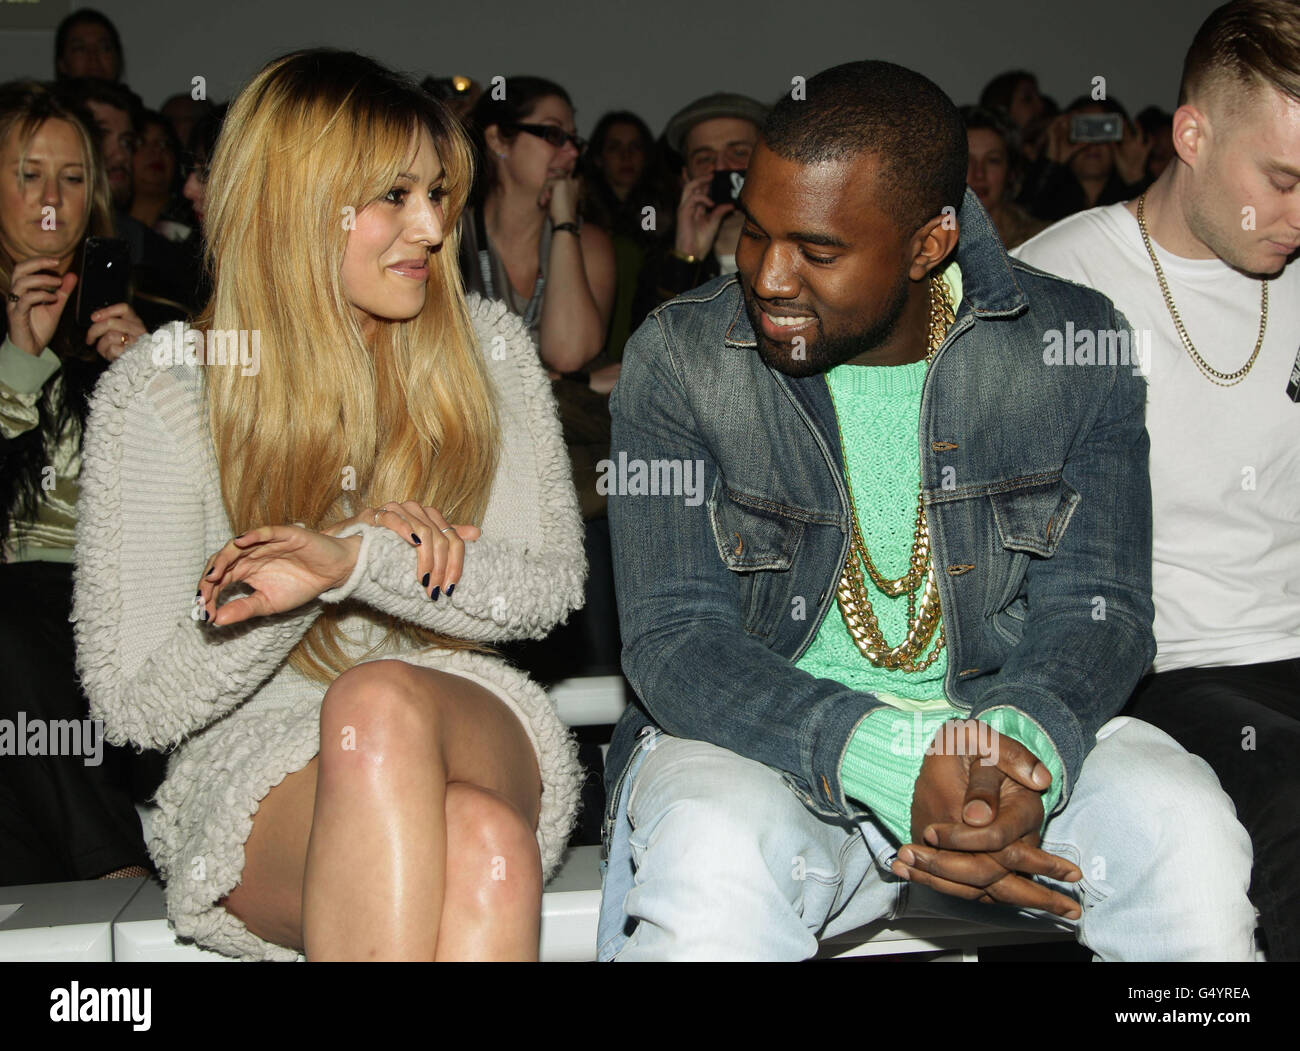 Kanye West and Zara Martin attending the Mark Fast London Fashion Week show, at the Courtyard Show Space, Somerset House in central London. Stock Photo